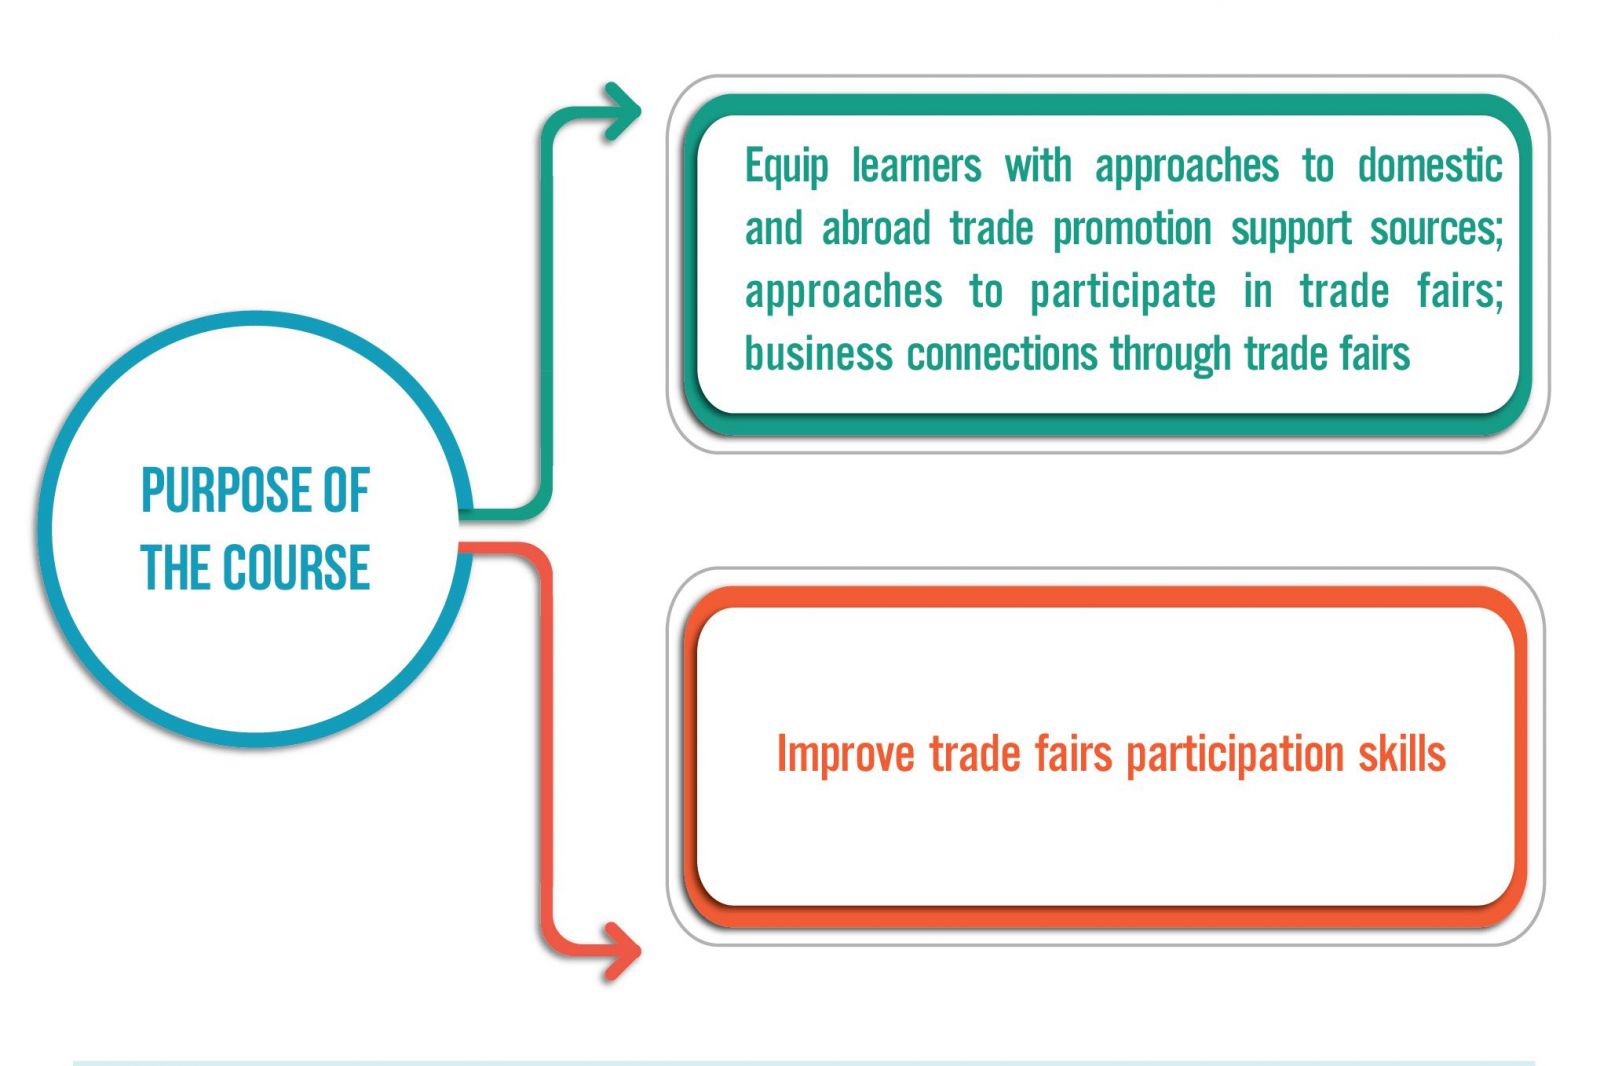 Effective trade fairs participation